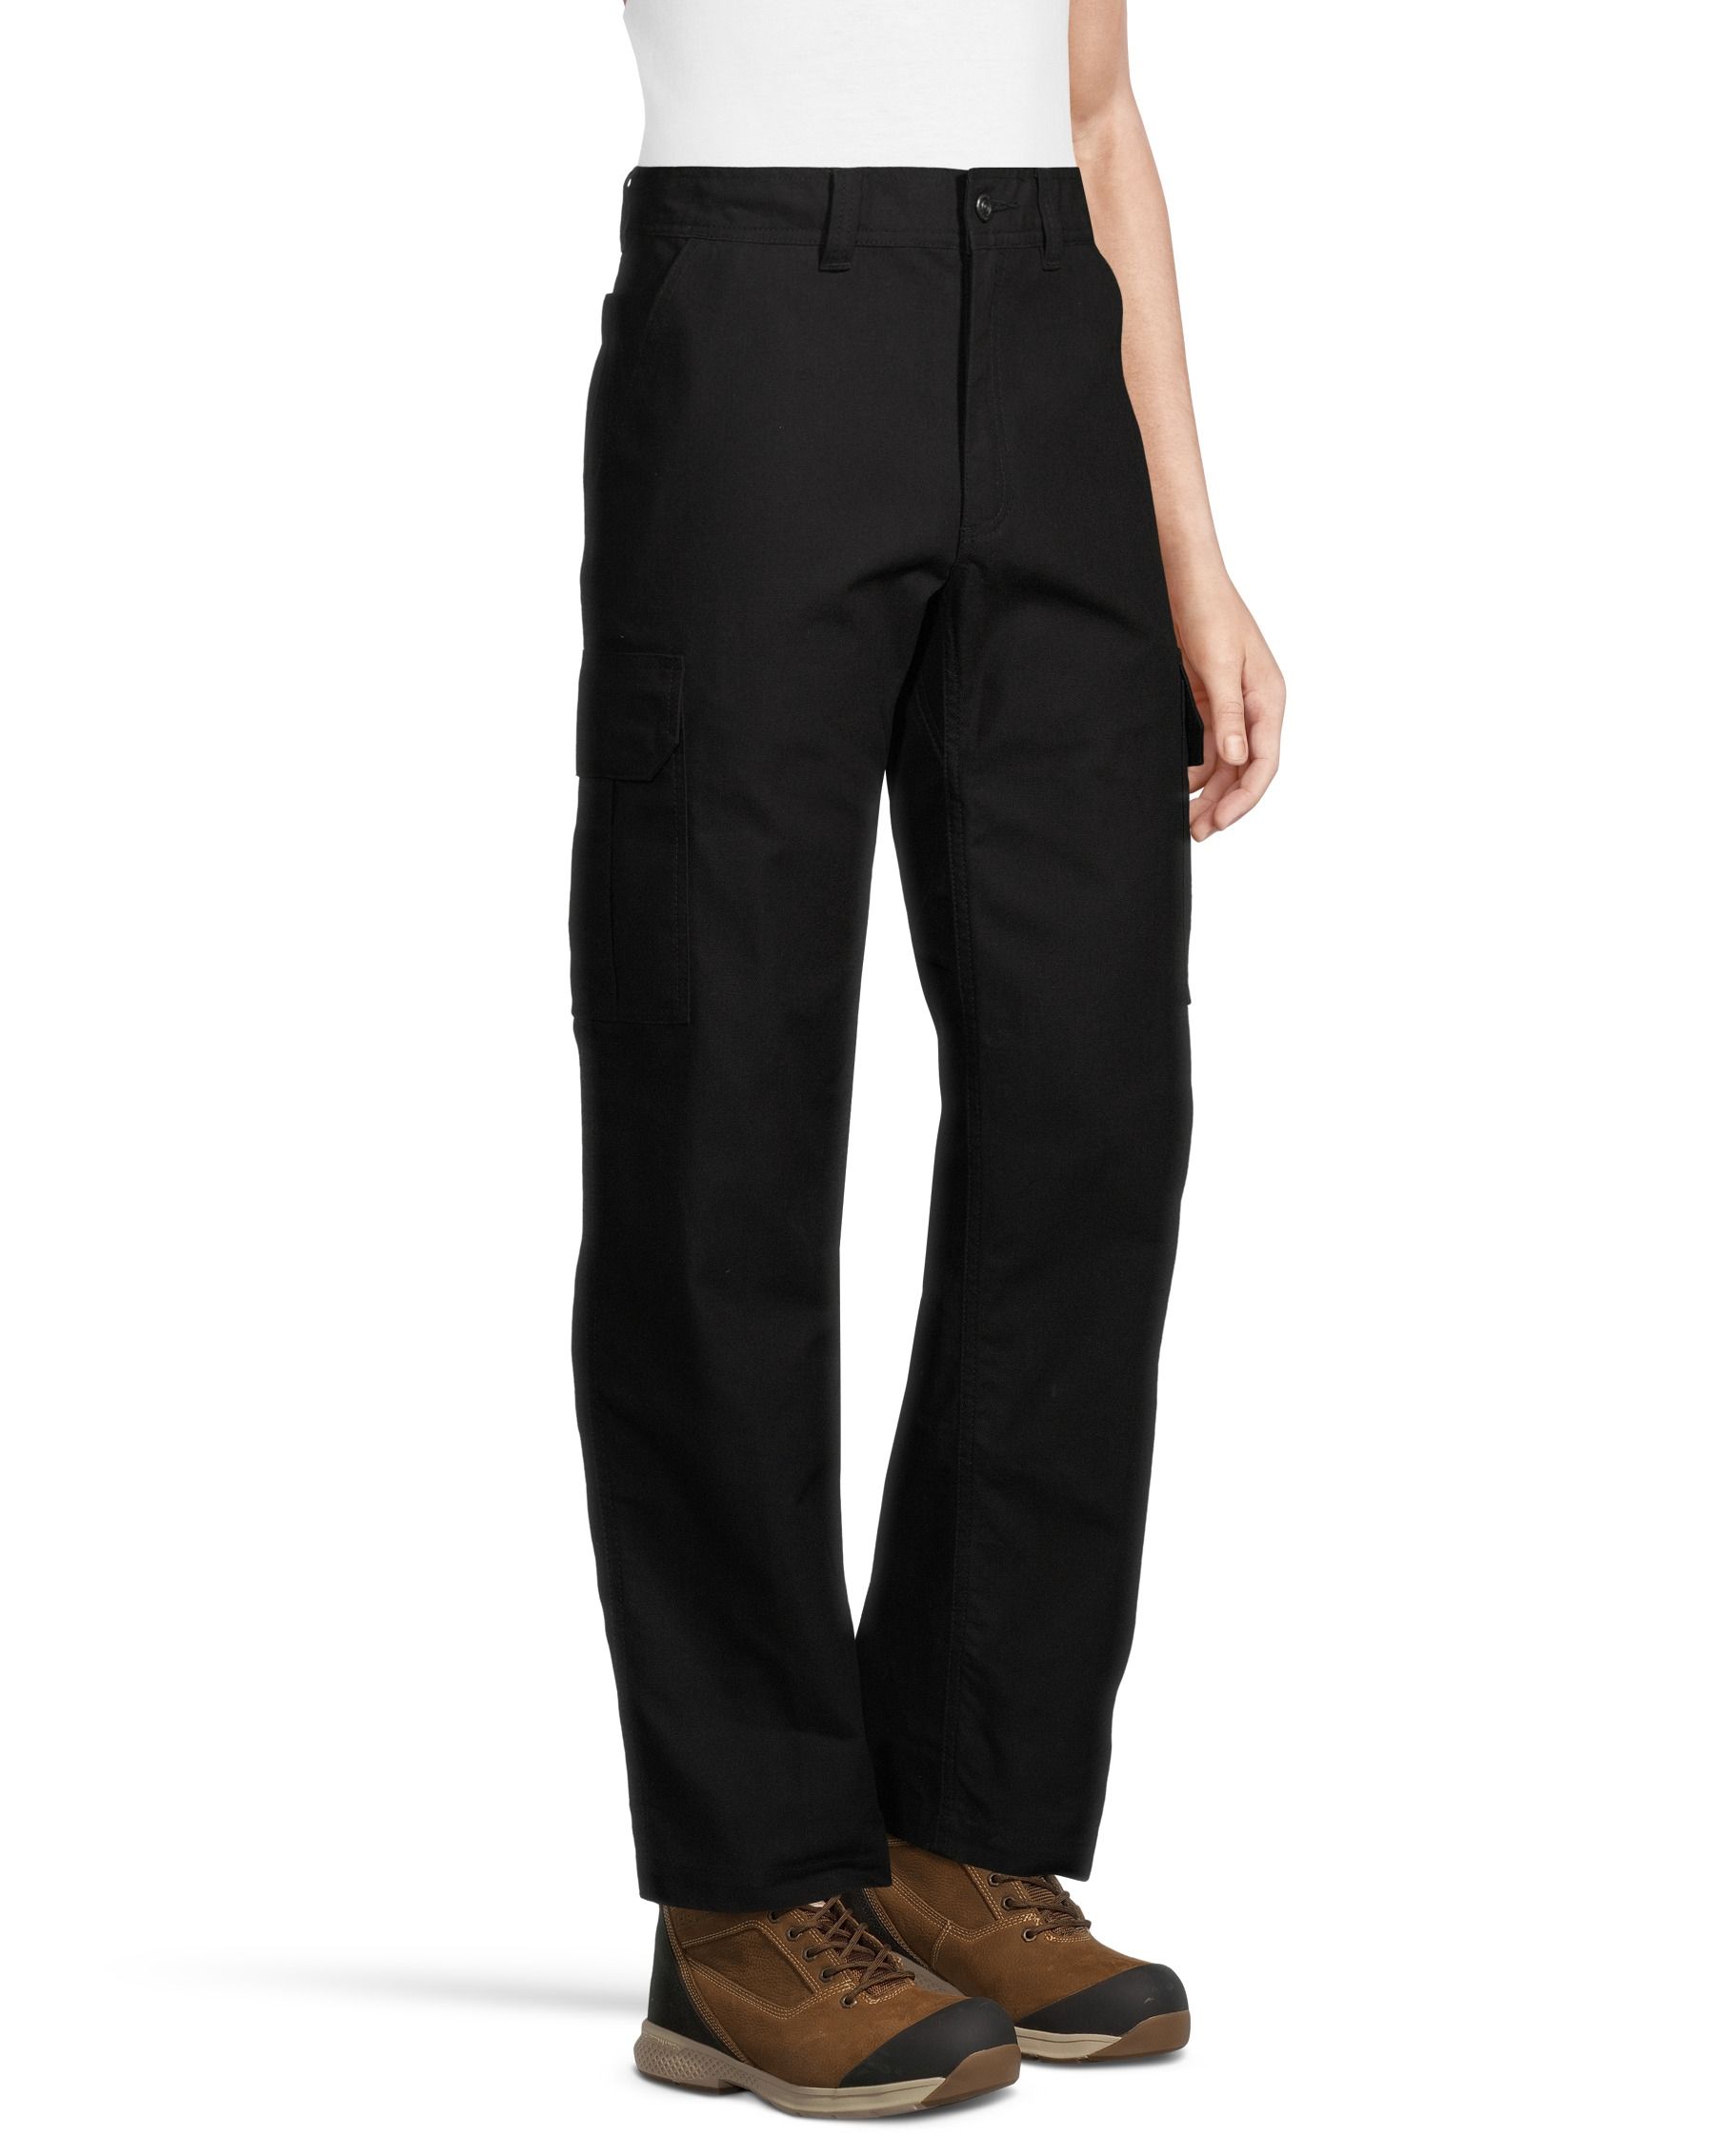 Helly Hansen Workwear 77429 Alna 4X Work Trouser Class 1  Clothing from MI  Supplies Limited UK